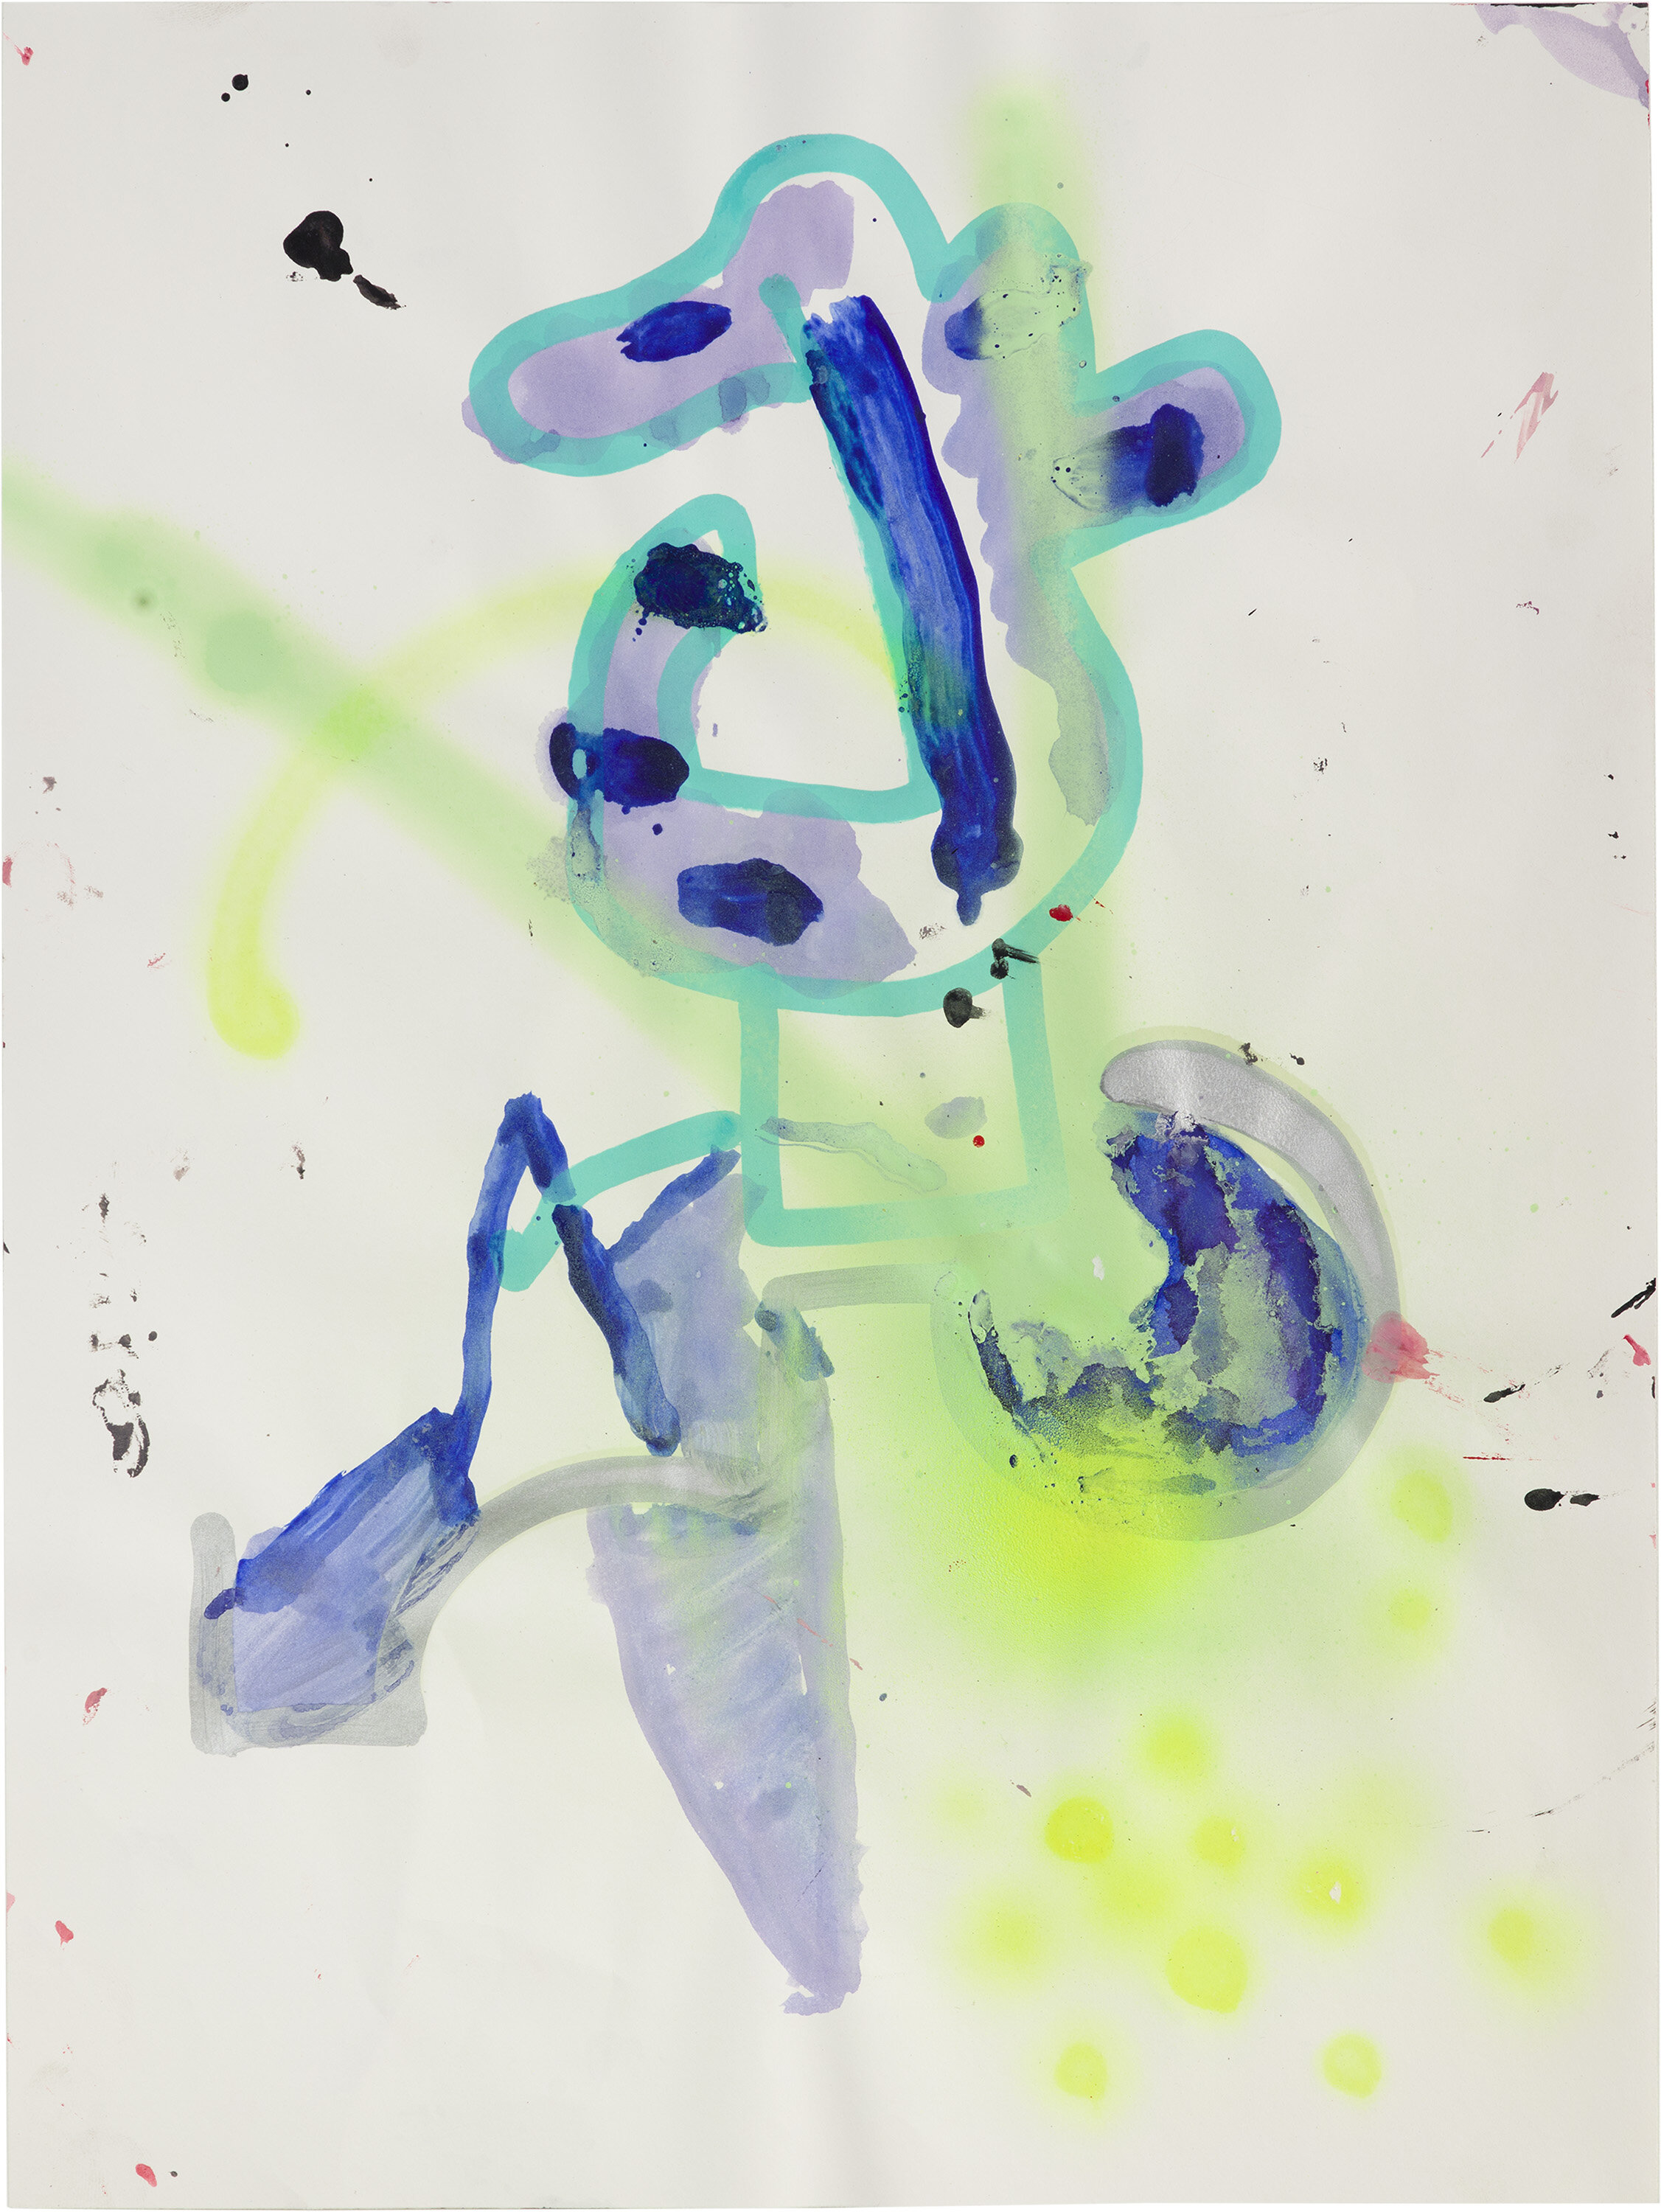  Drew Beattie and Ben Shepard   DBBS-DRW-2016-072   2016  acrylic and spray paint on paper  24 x 18 inches 